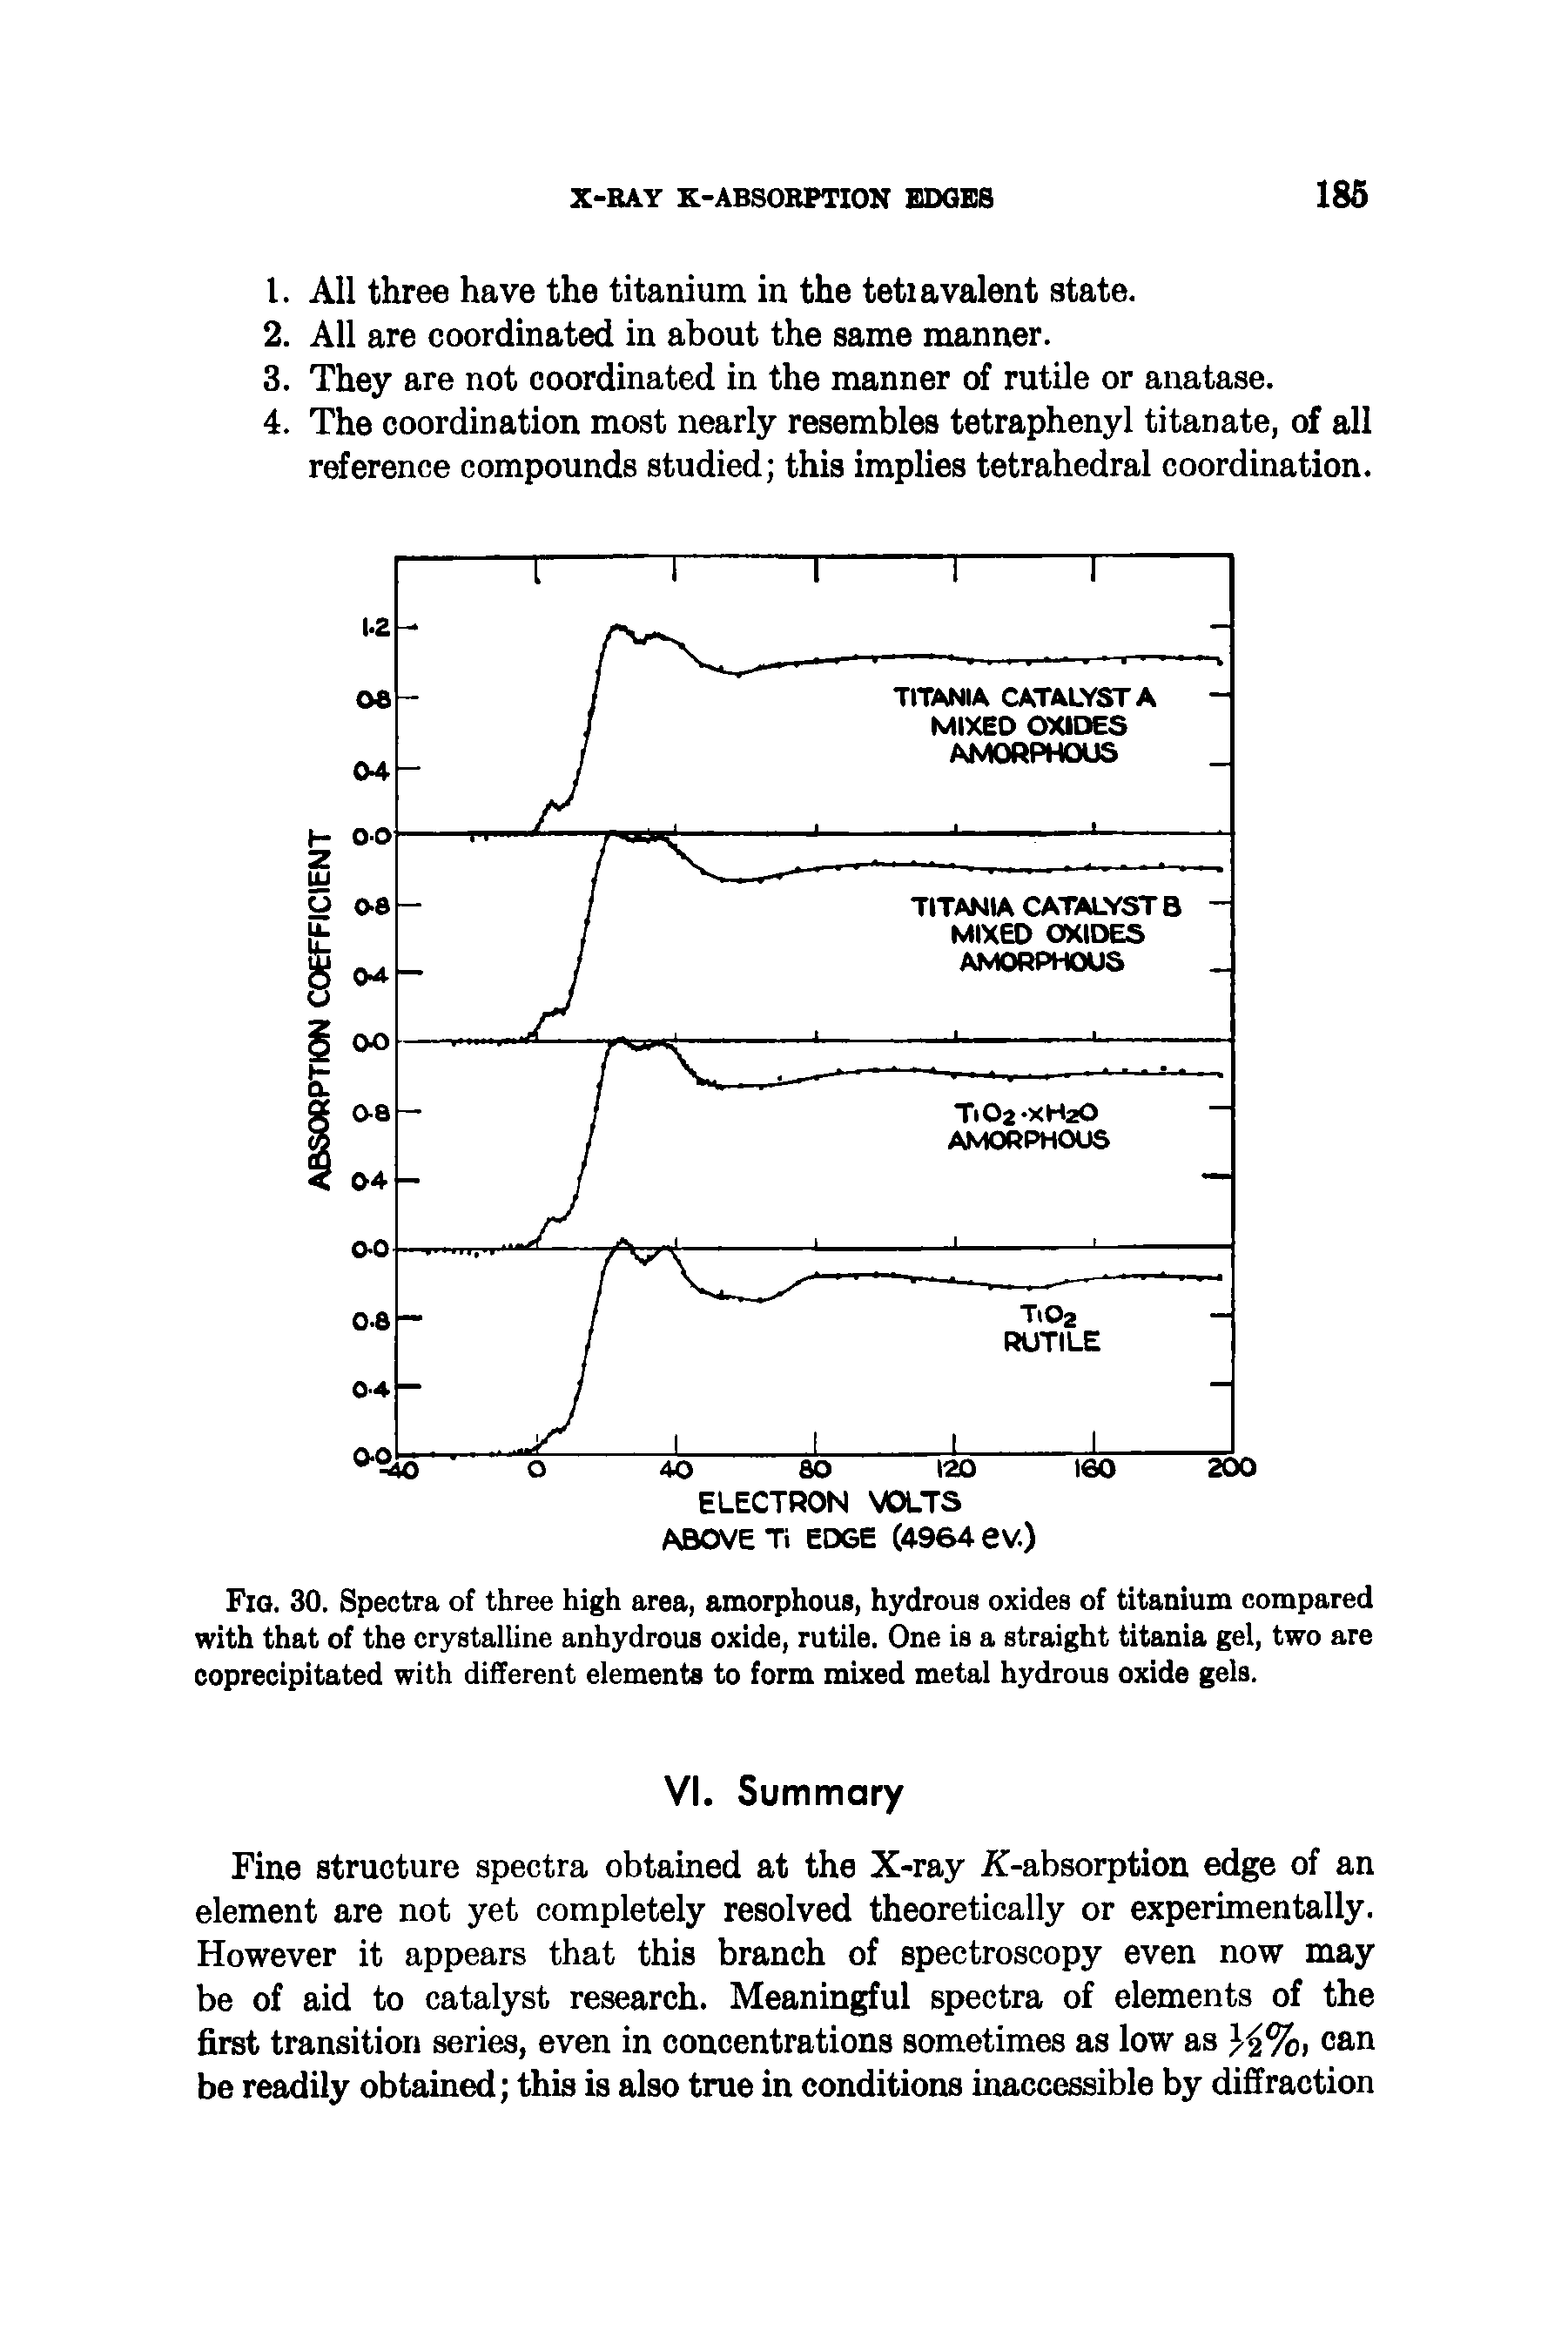 Fig. 30. Spectra of three high area, amorphous, hydrous oxides of titanium compared with that of the crystalhne anhydrous oxide, rutile. One is a straight titania gel, two are coprecipitated with different elements to form mixed metal hydrous oxide gels.